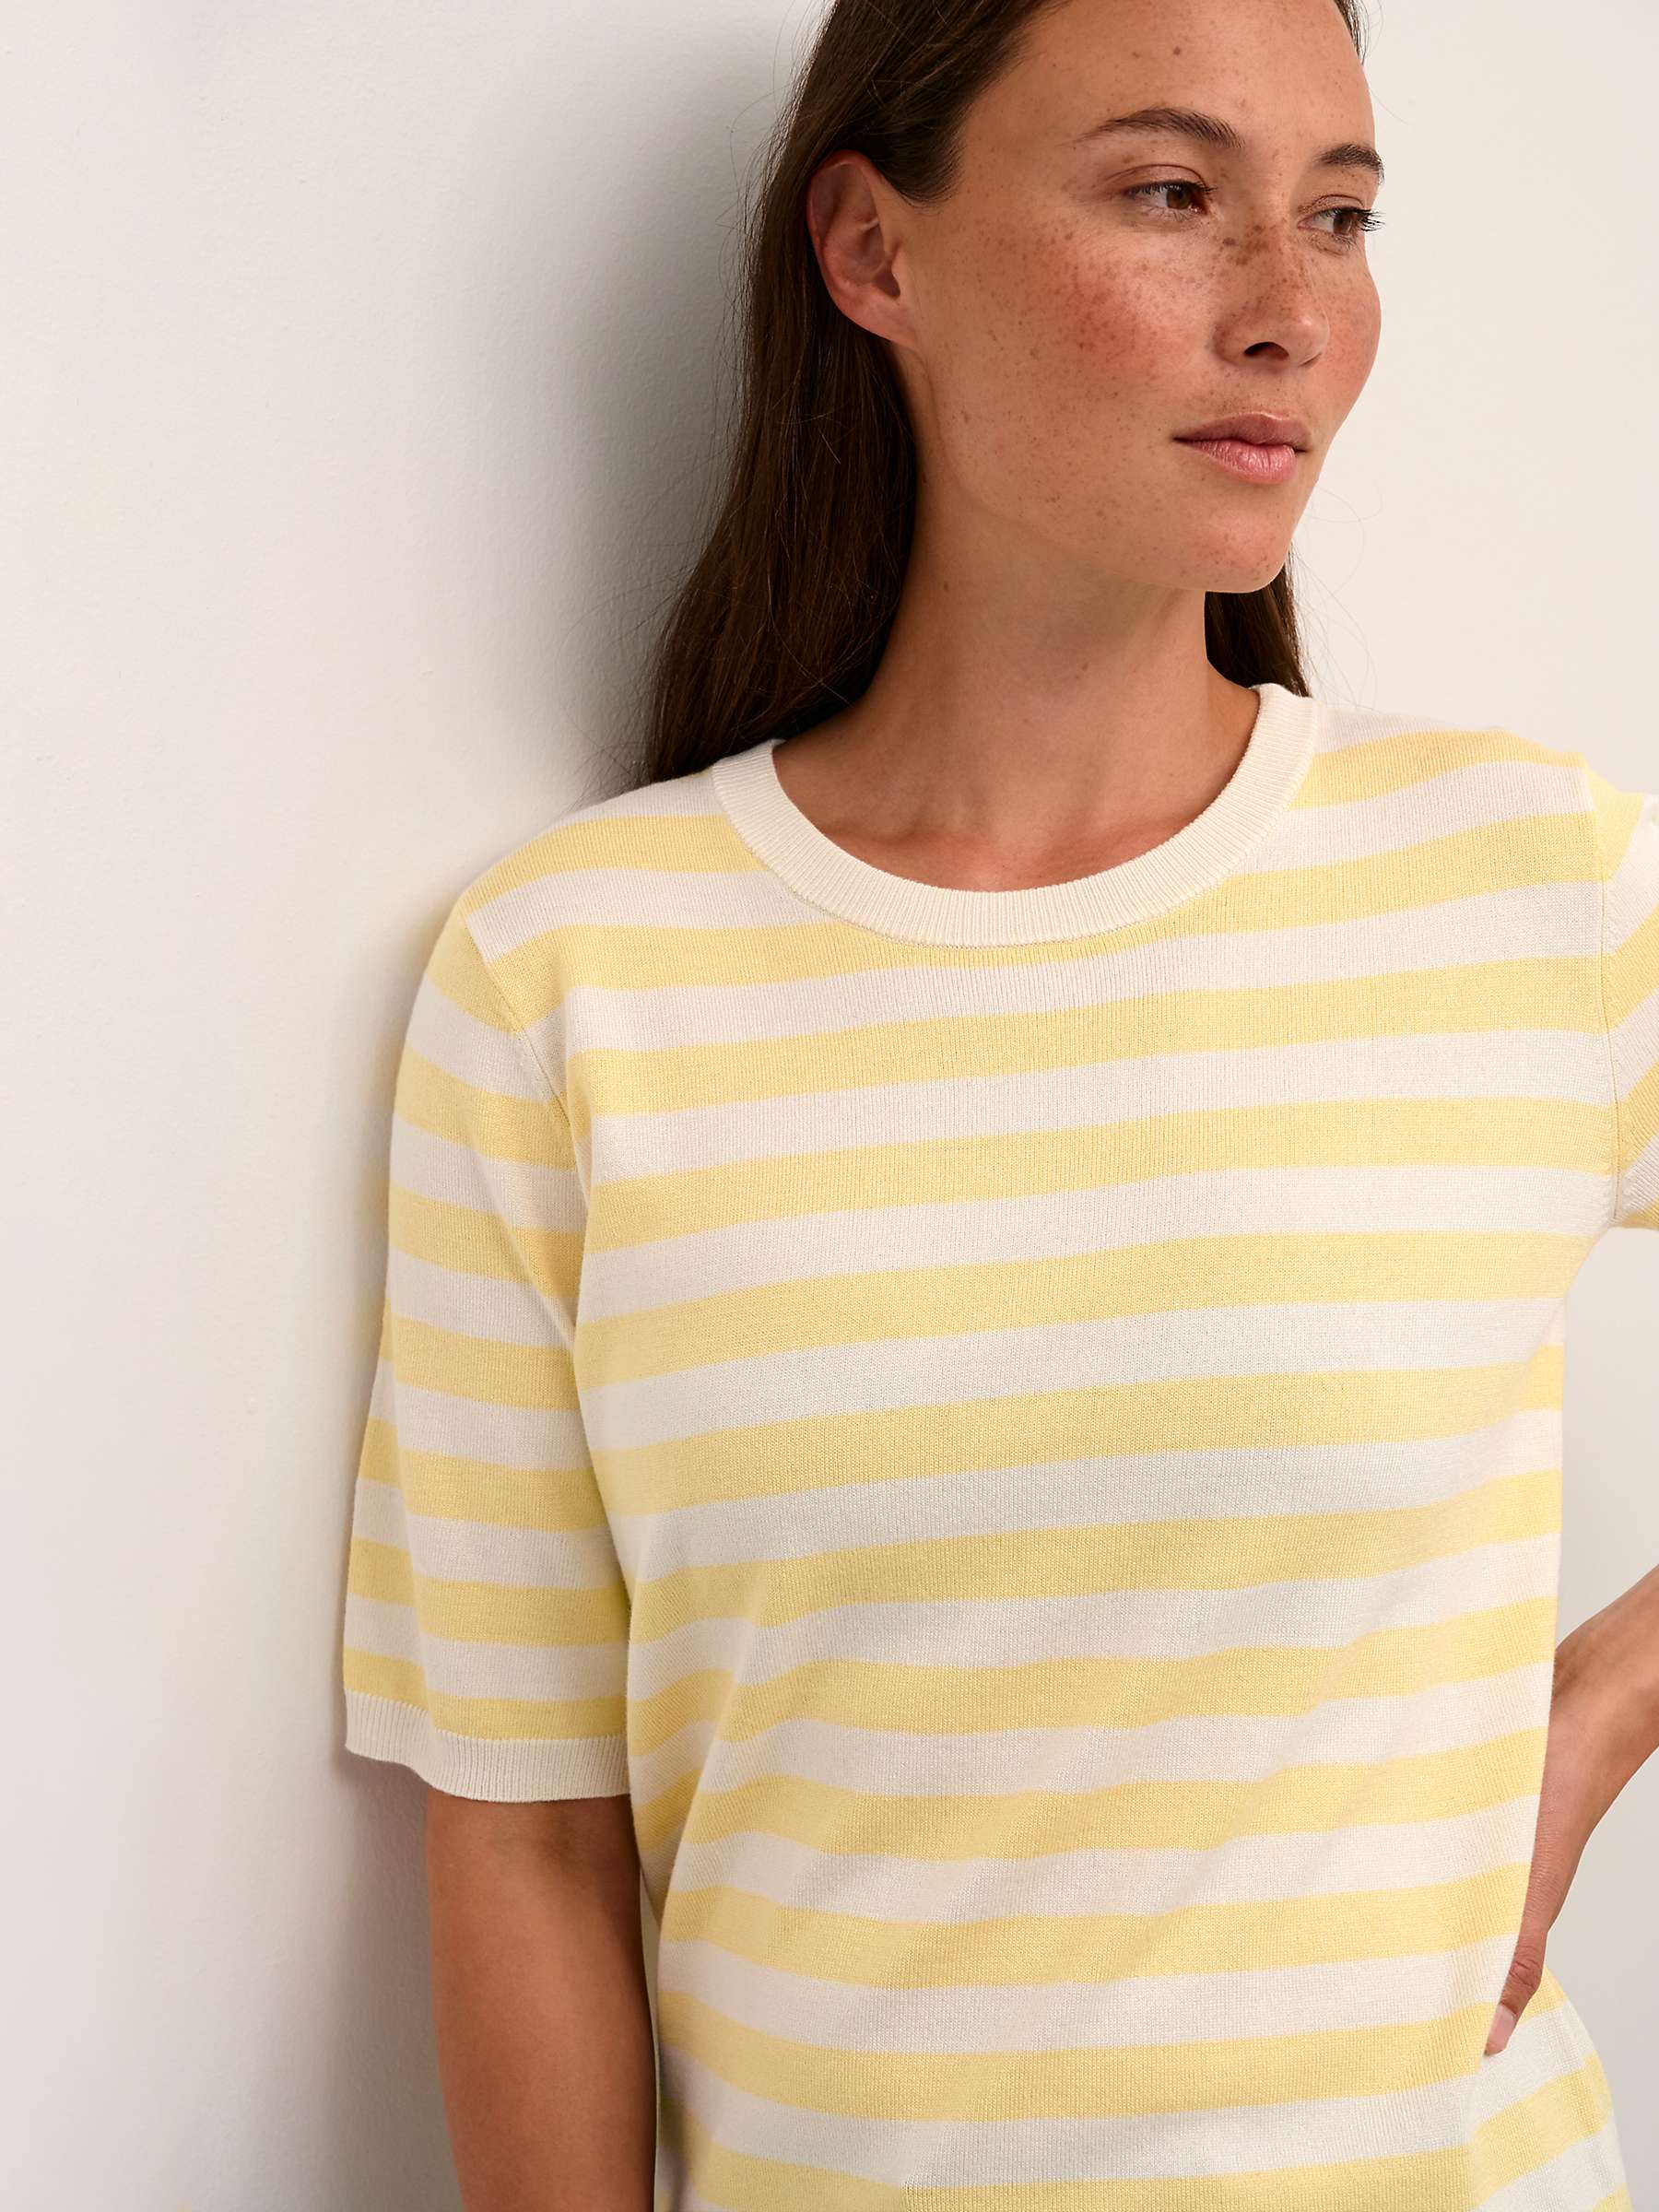 Buy KAFFE Lizza Striped Knitted Top, Mellow Yellow/Turtle Online at johnlewis.com